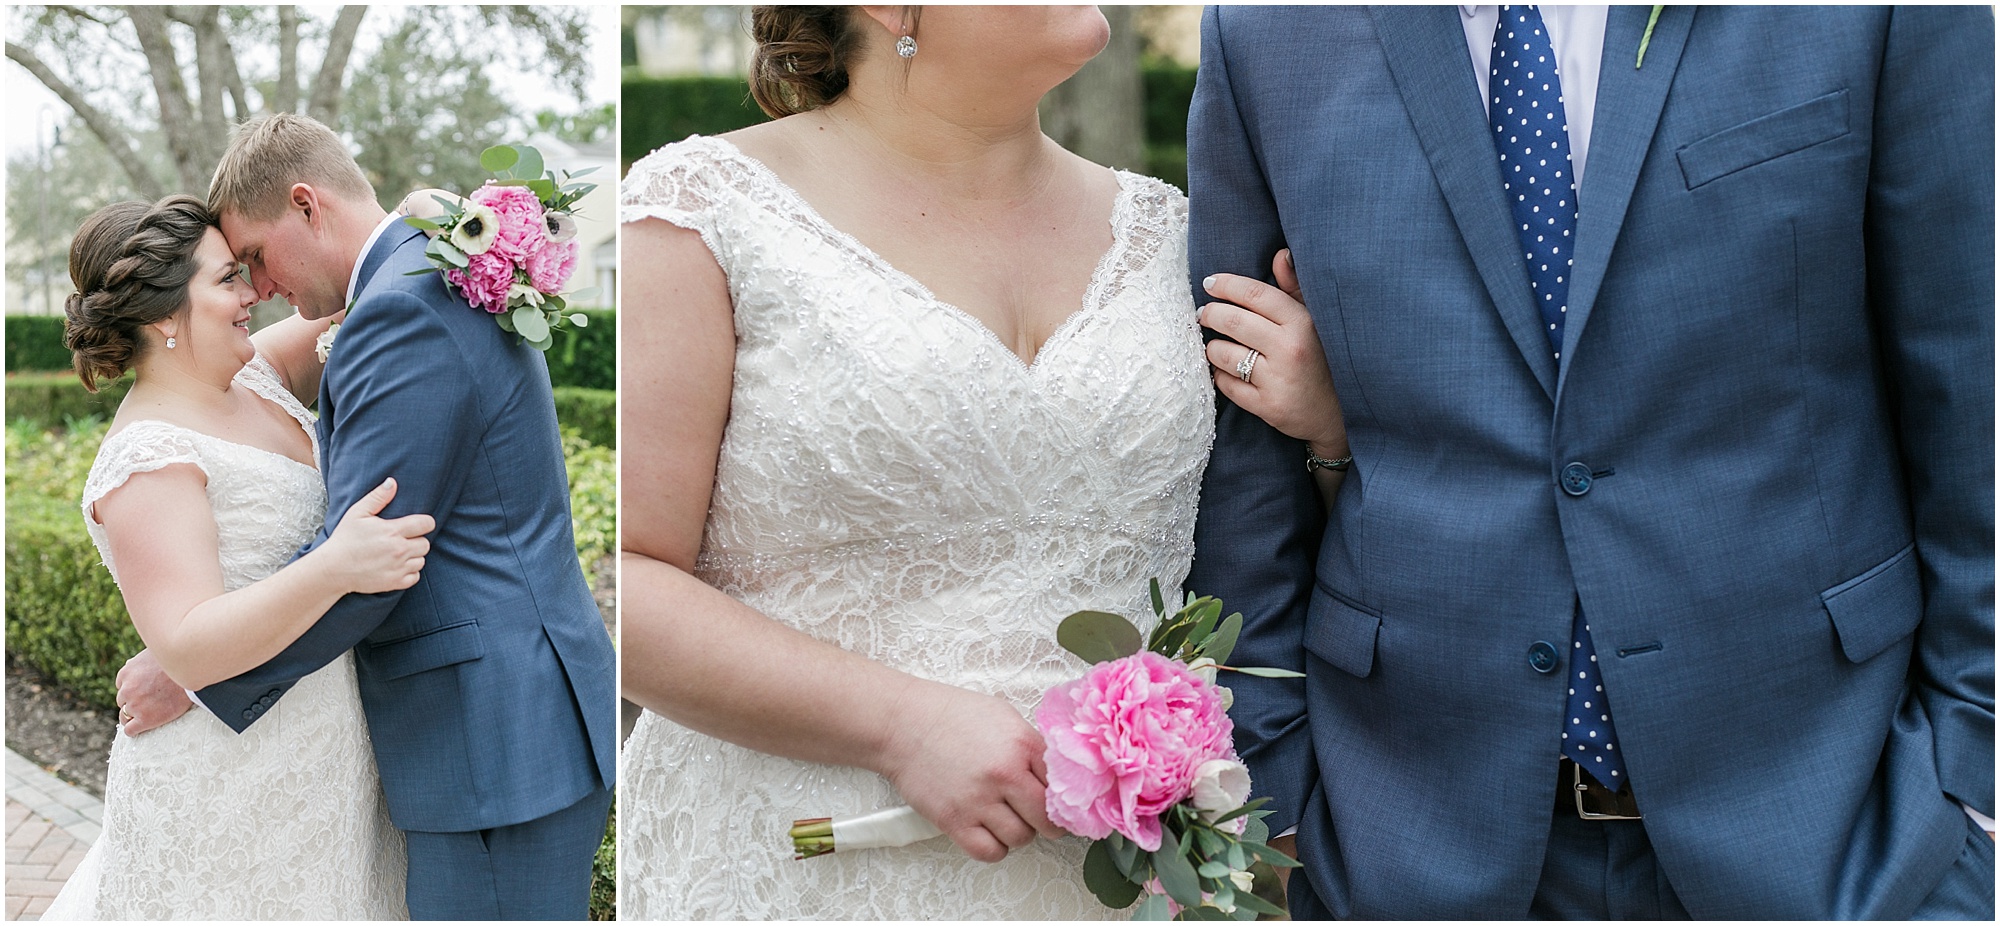 Portraits of the bride and groom holding each other while walking down a pathway outdoors. 